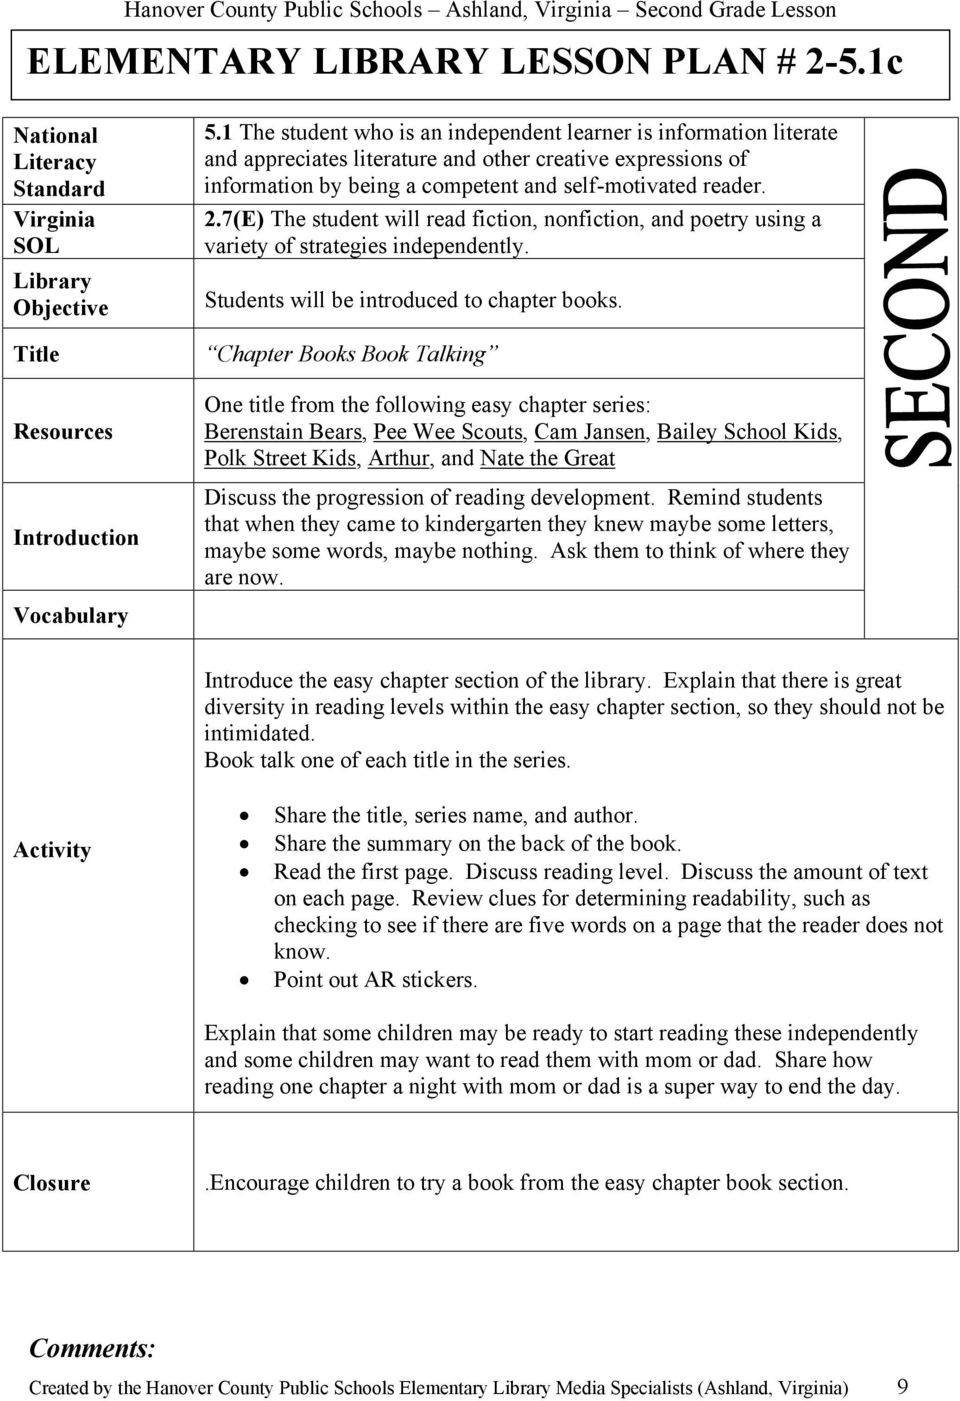 Elementary Library Lesson Plan # 2-1.4A - Pdf Free Download